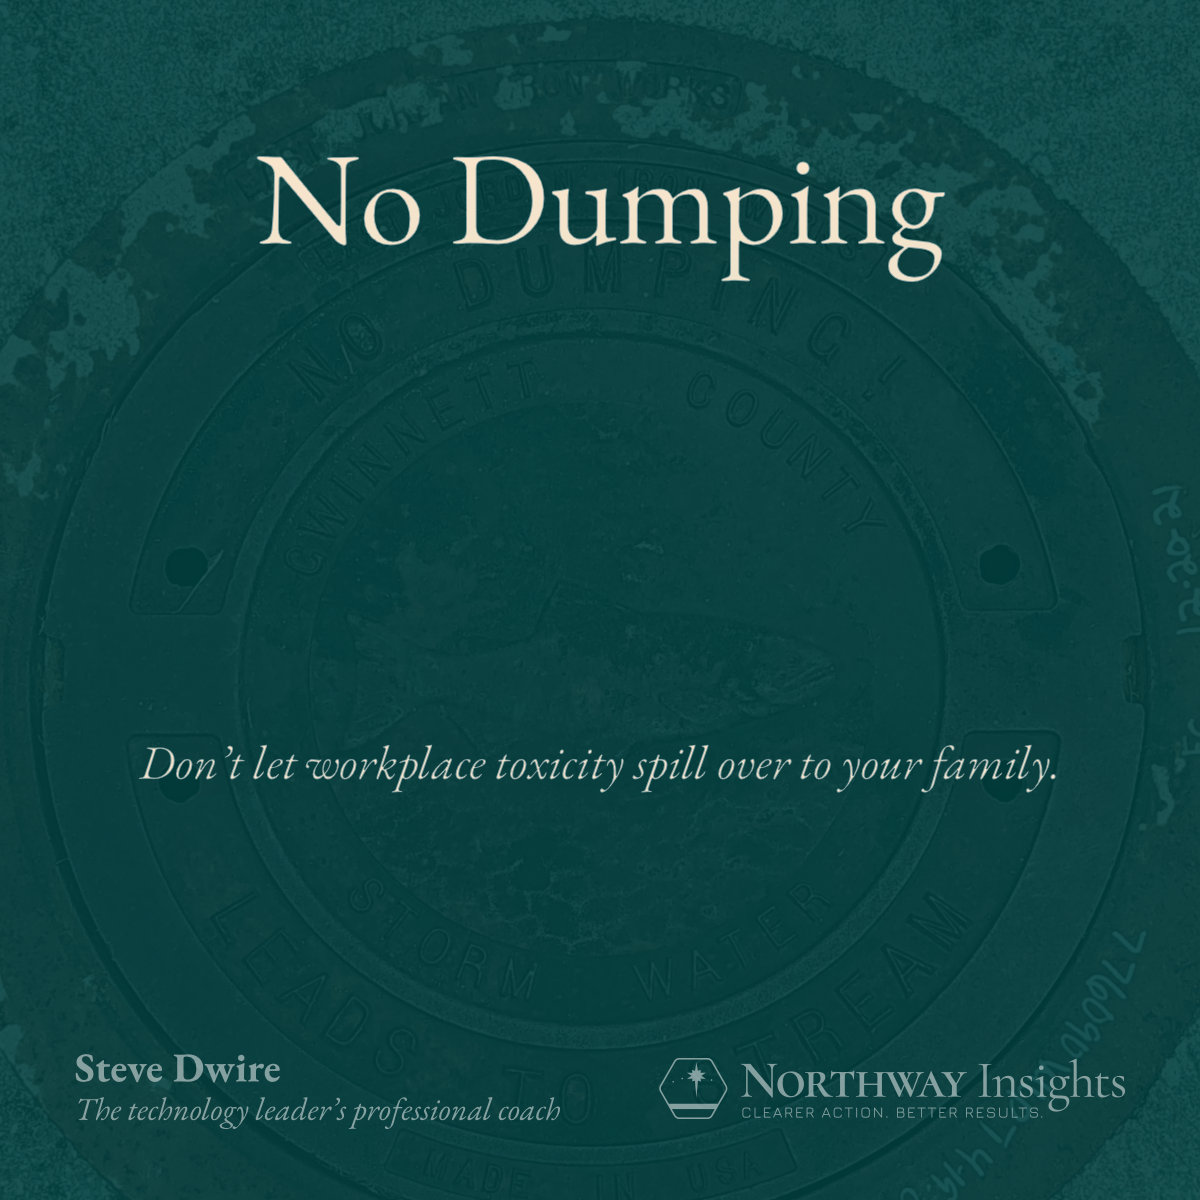 No Dumping (Don't let workplace toxicity spill over to your family.)